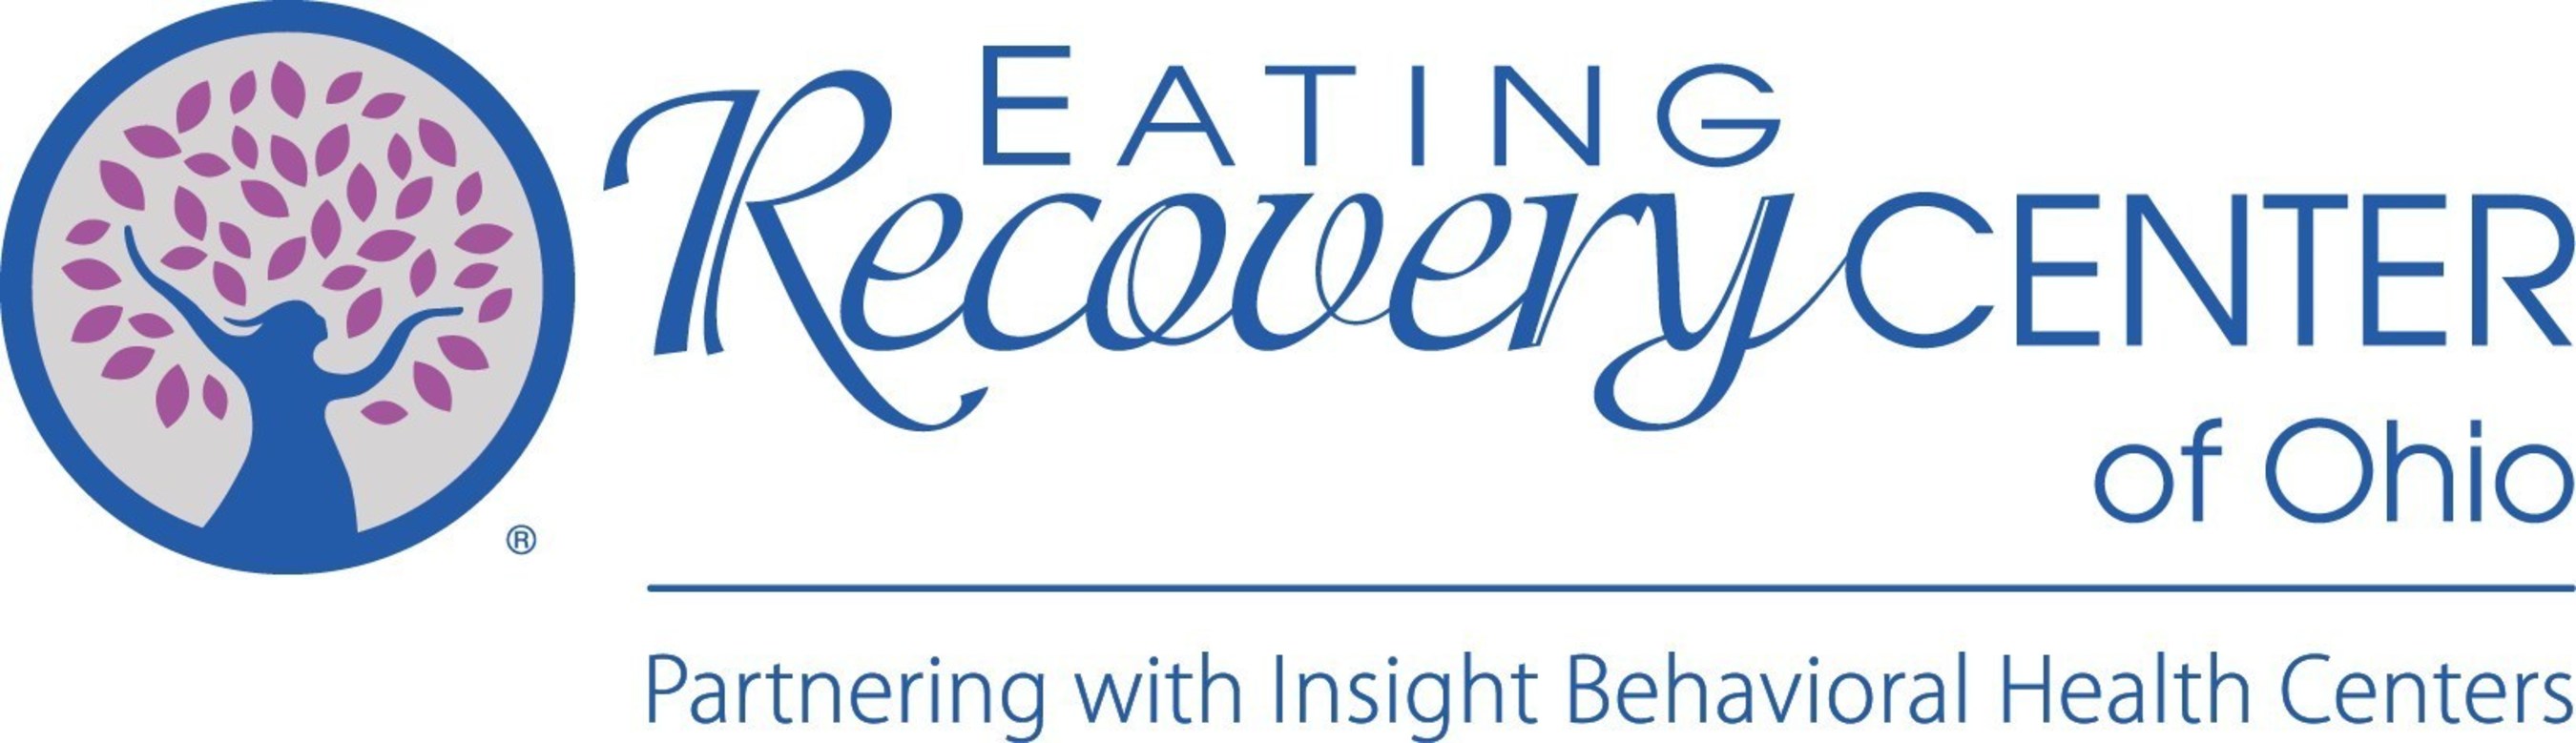 Eating Recovery Center of Ohio Partnering with Insight Behavioral Health Centers Logo